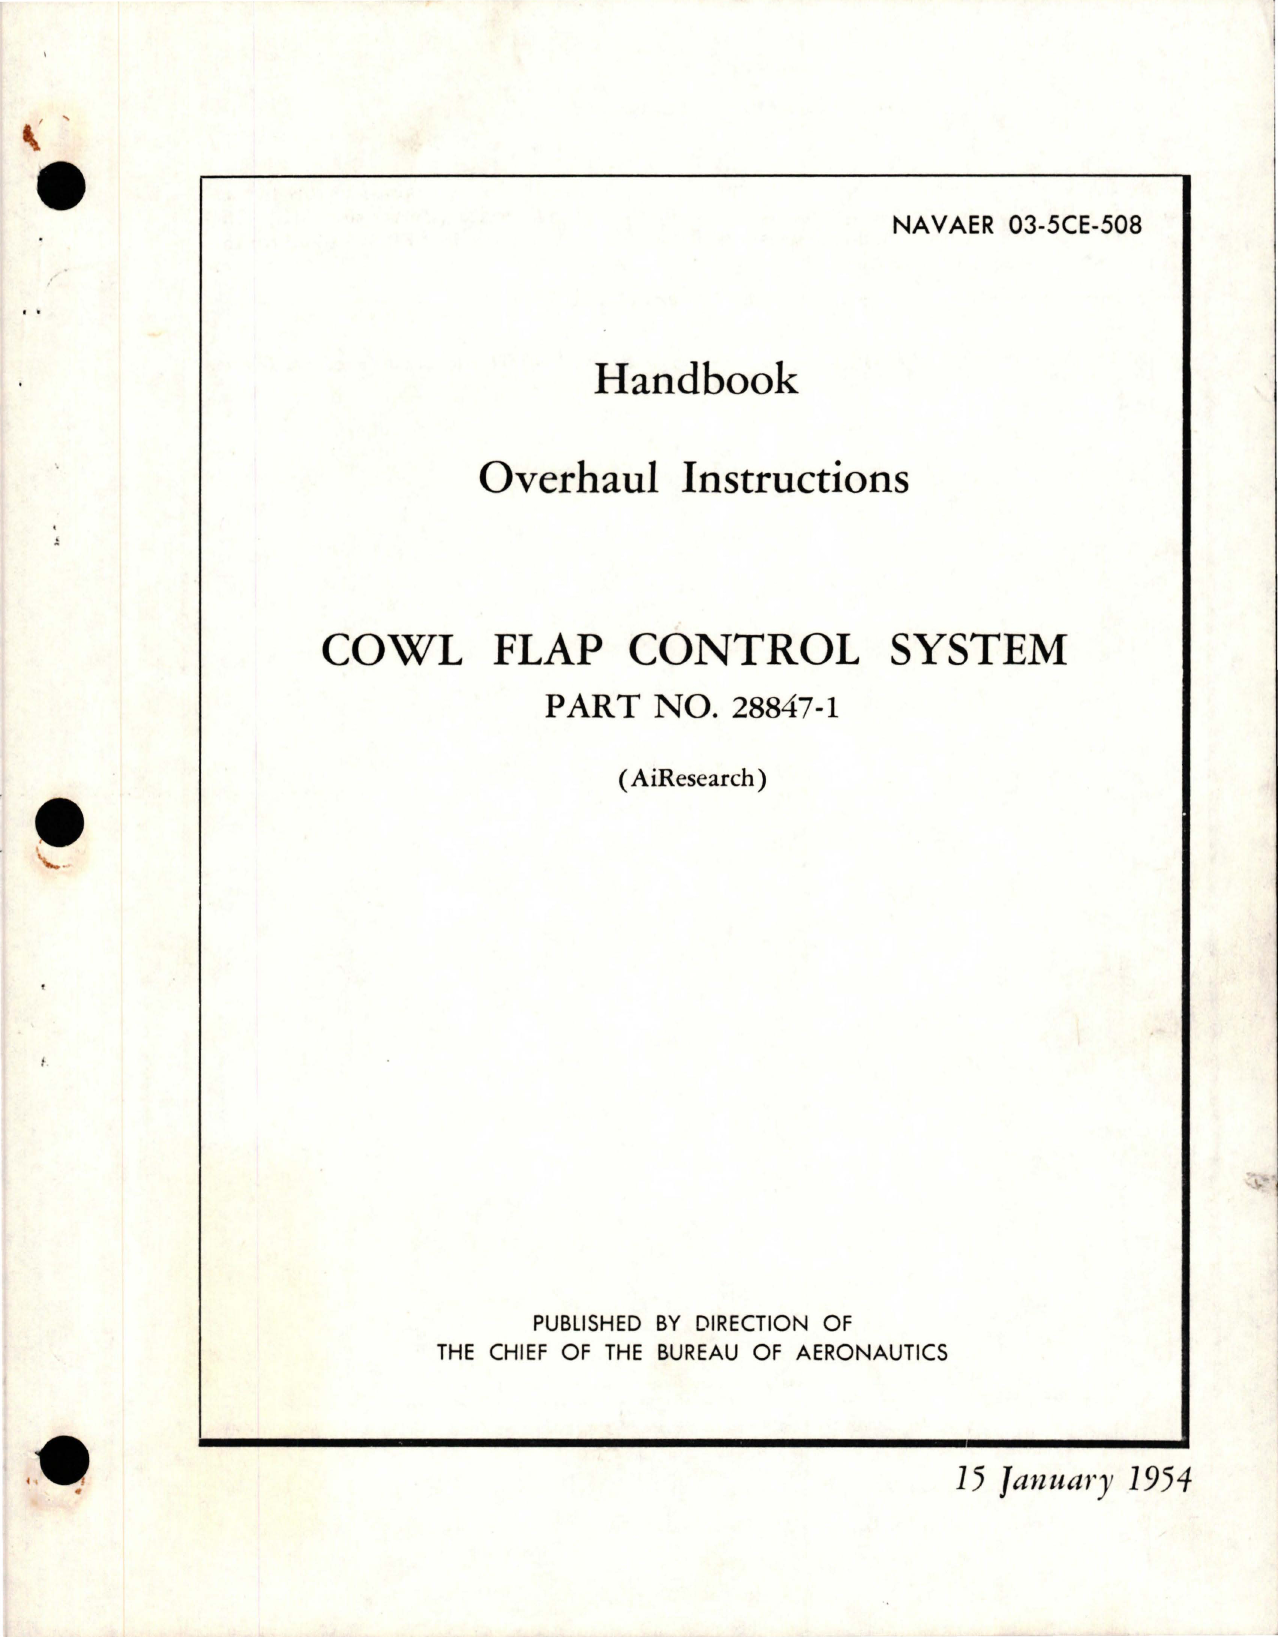 Sample page 1 from AirCorps Library document: Overhaul Instructions for Cowl Flap Control System - Part 28847-1